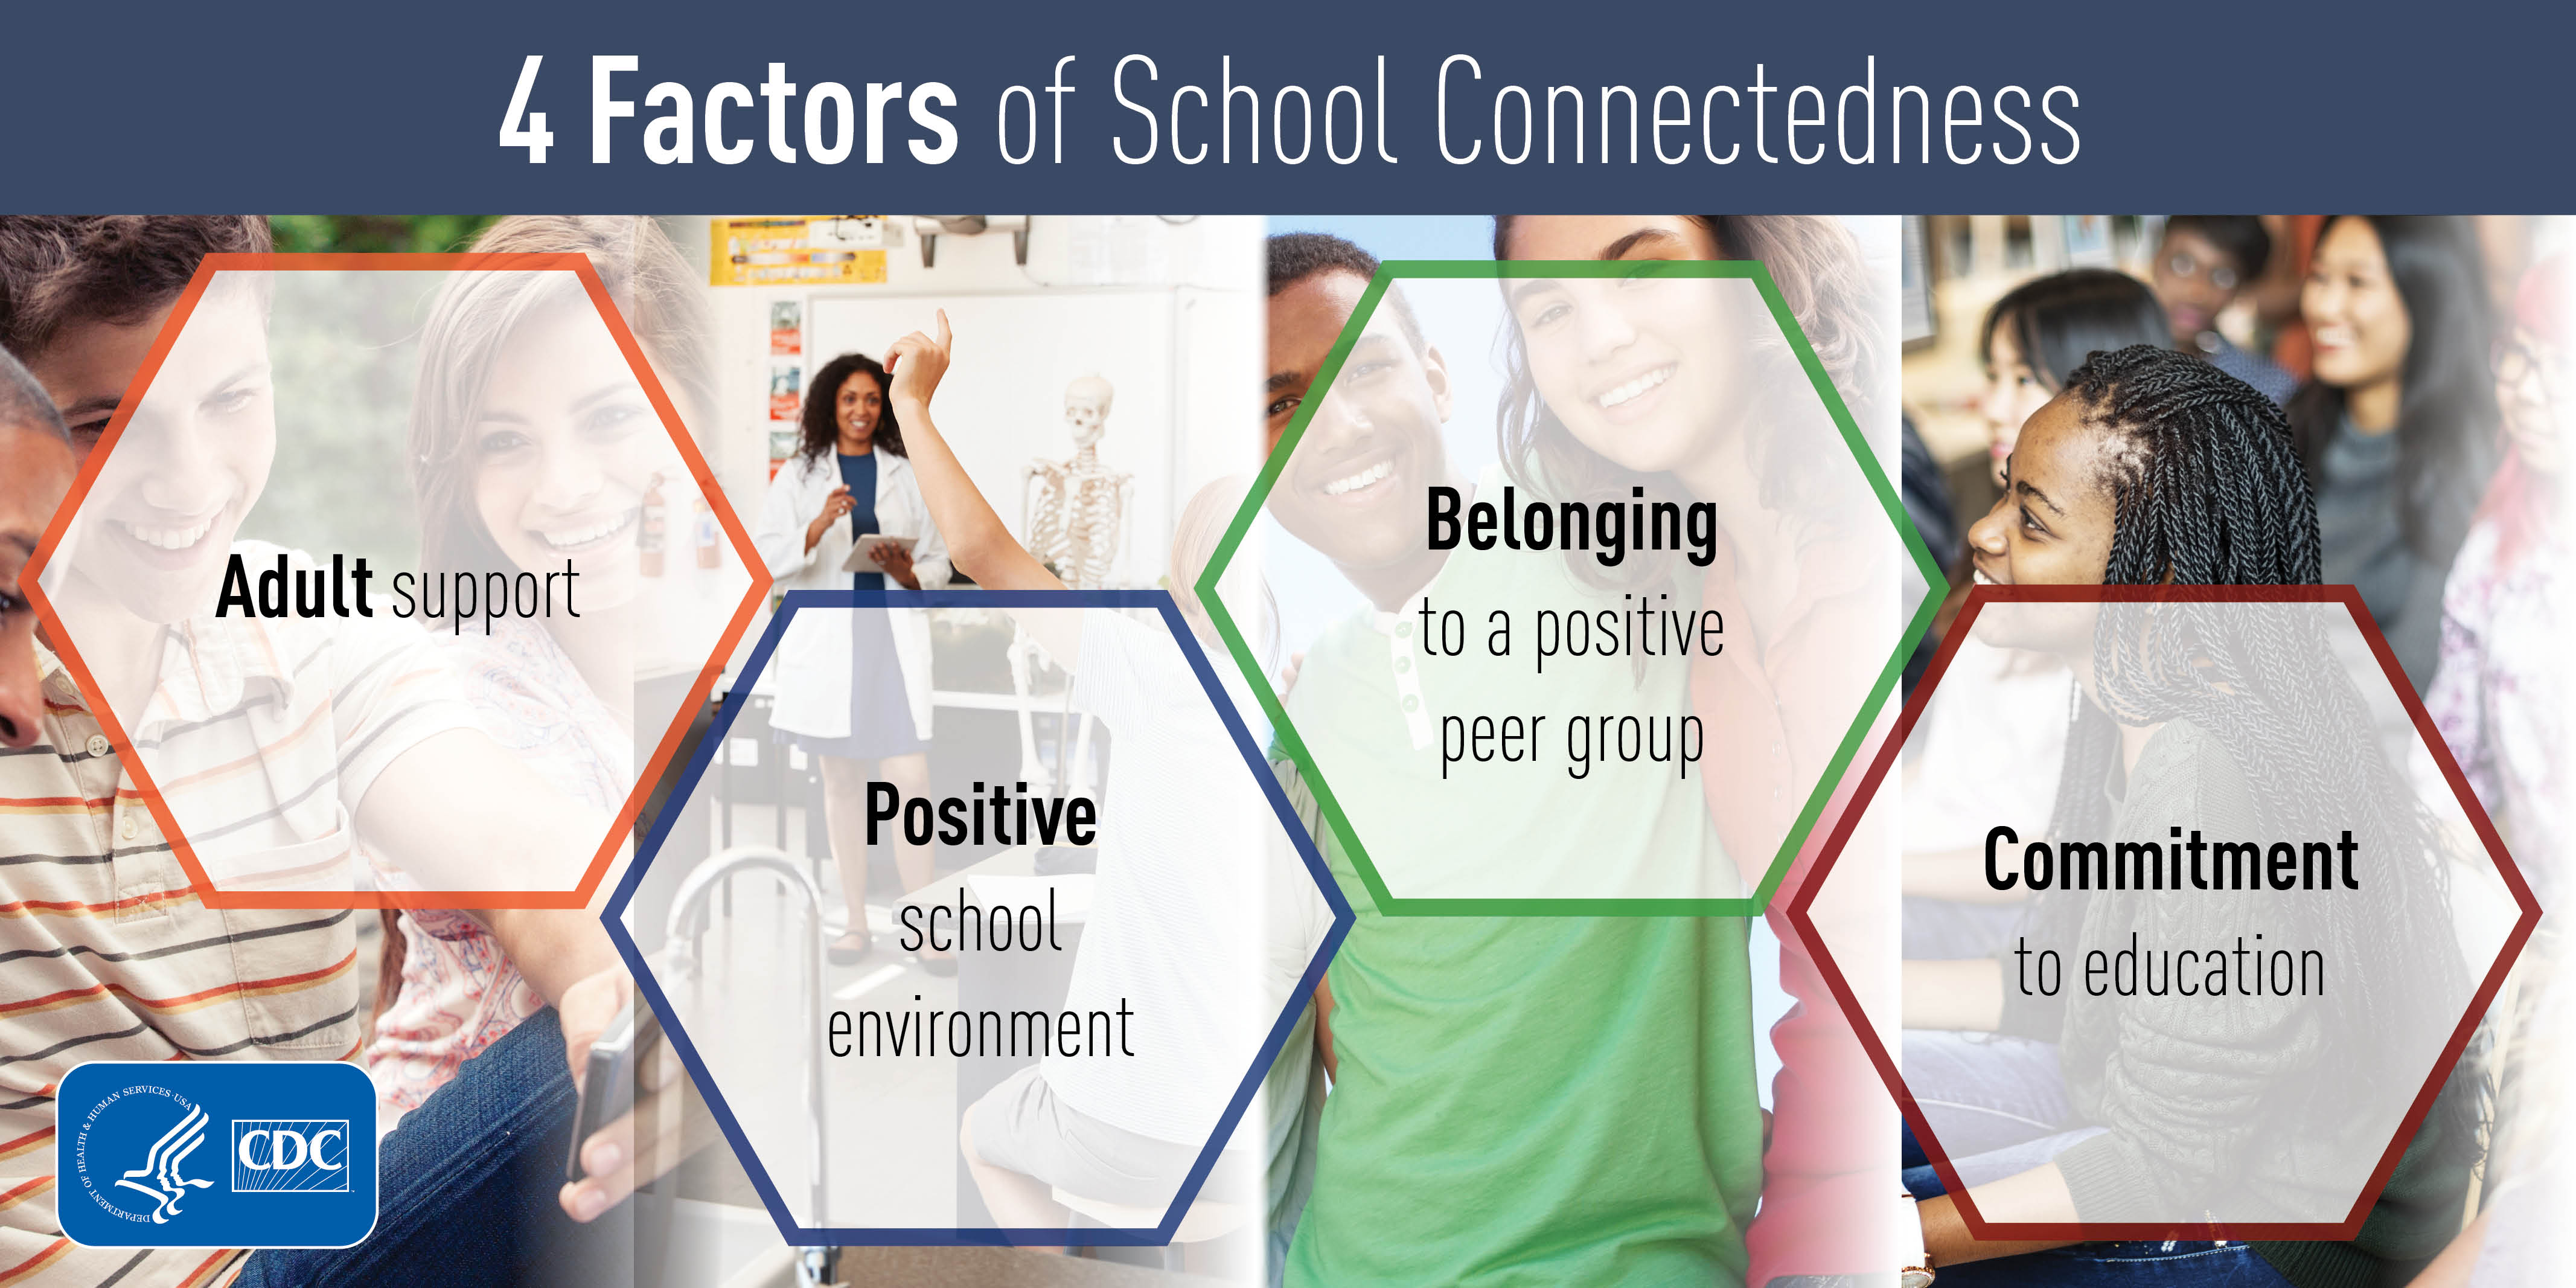 4 factors of school connectedness: adult support; positive school environment; belonging to a positive peer group; commitment to education